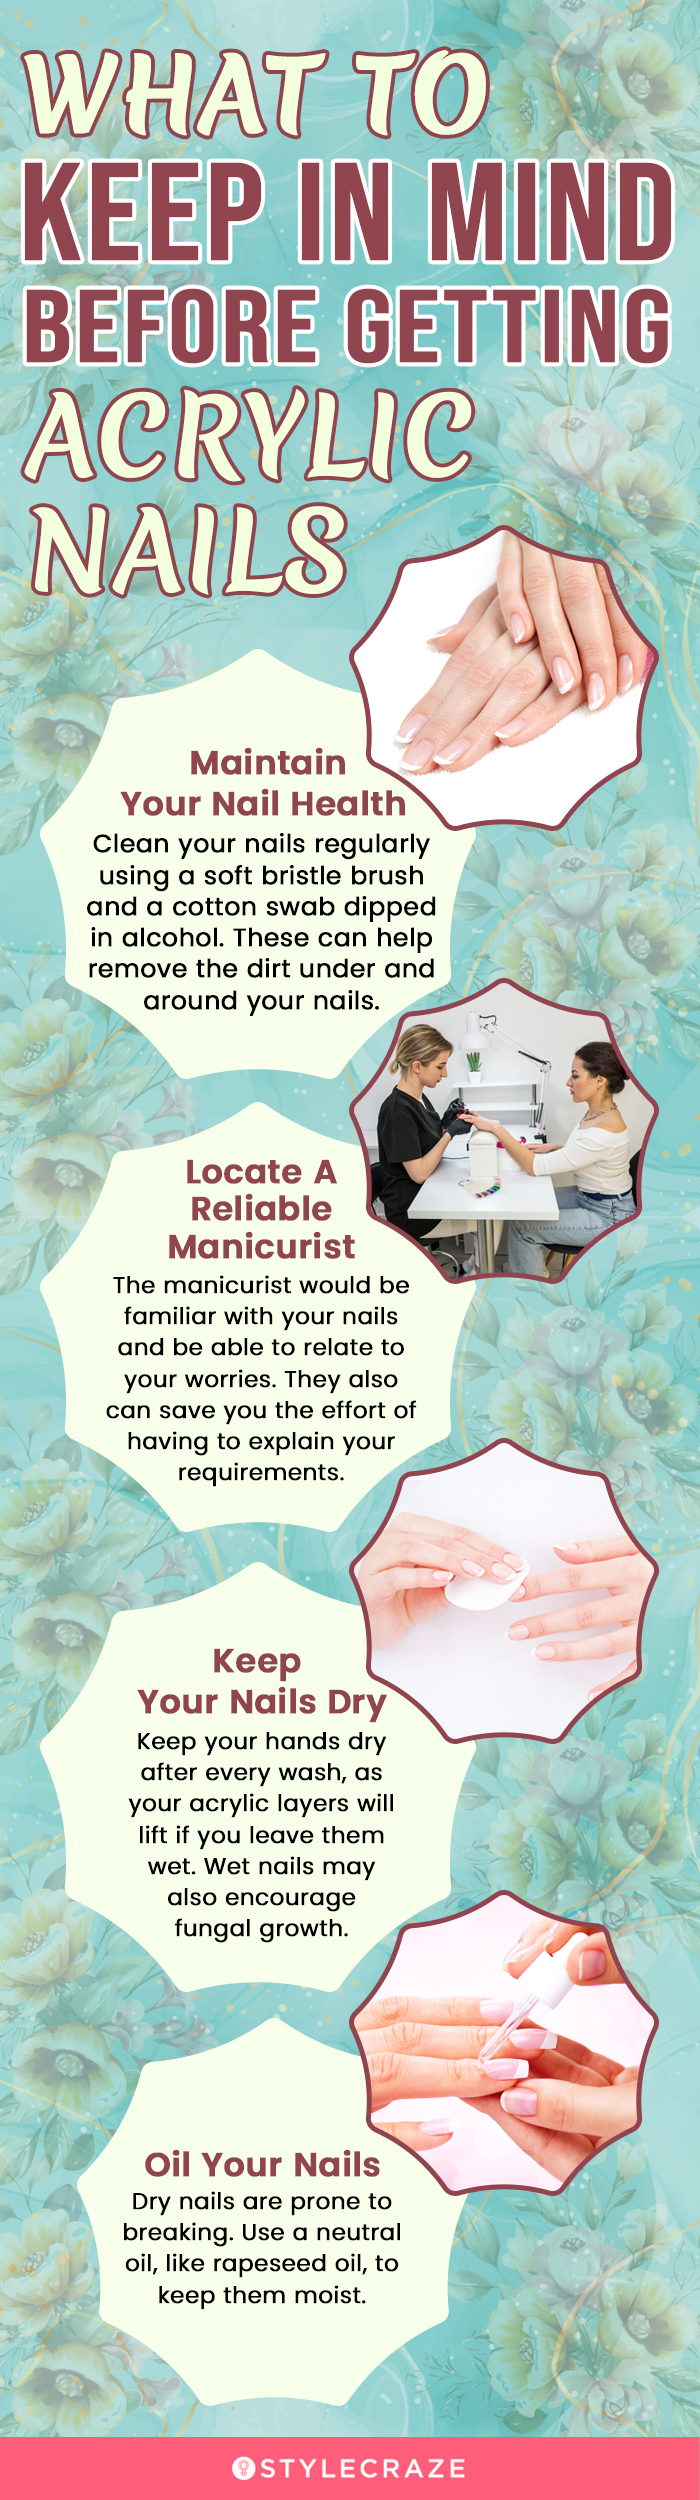 what to keep in mind before getting acrylic nails (infographic)